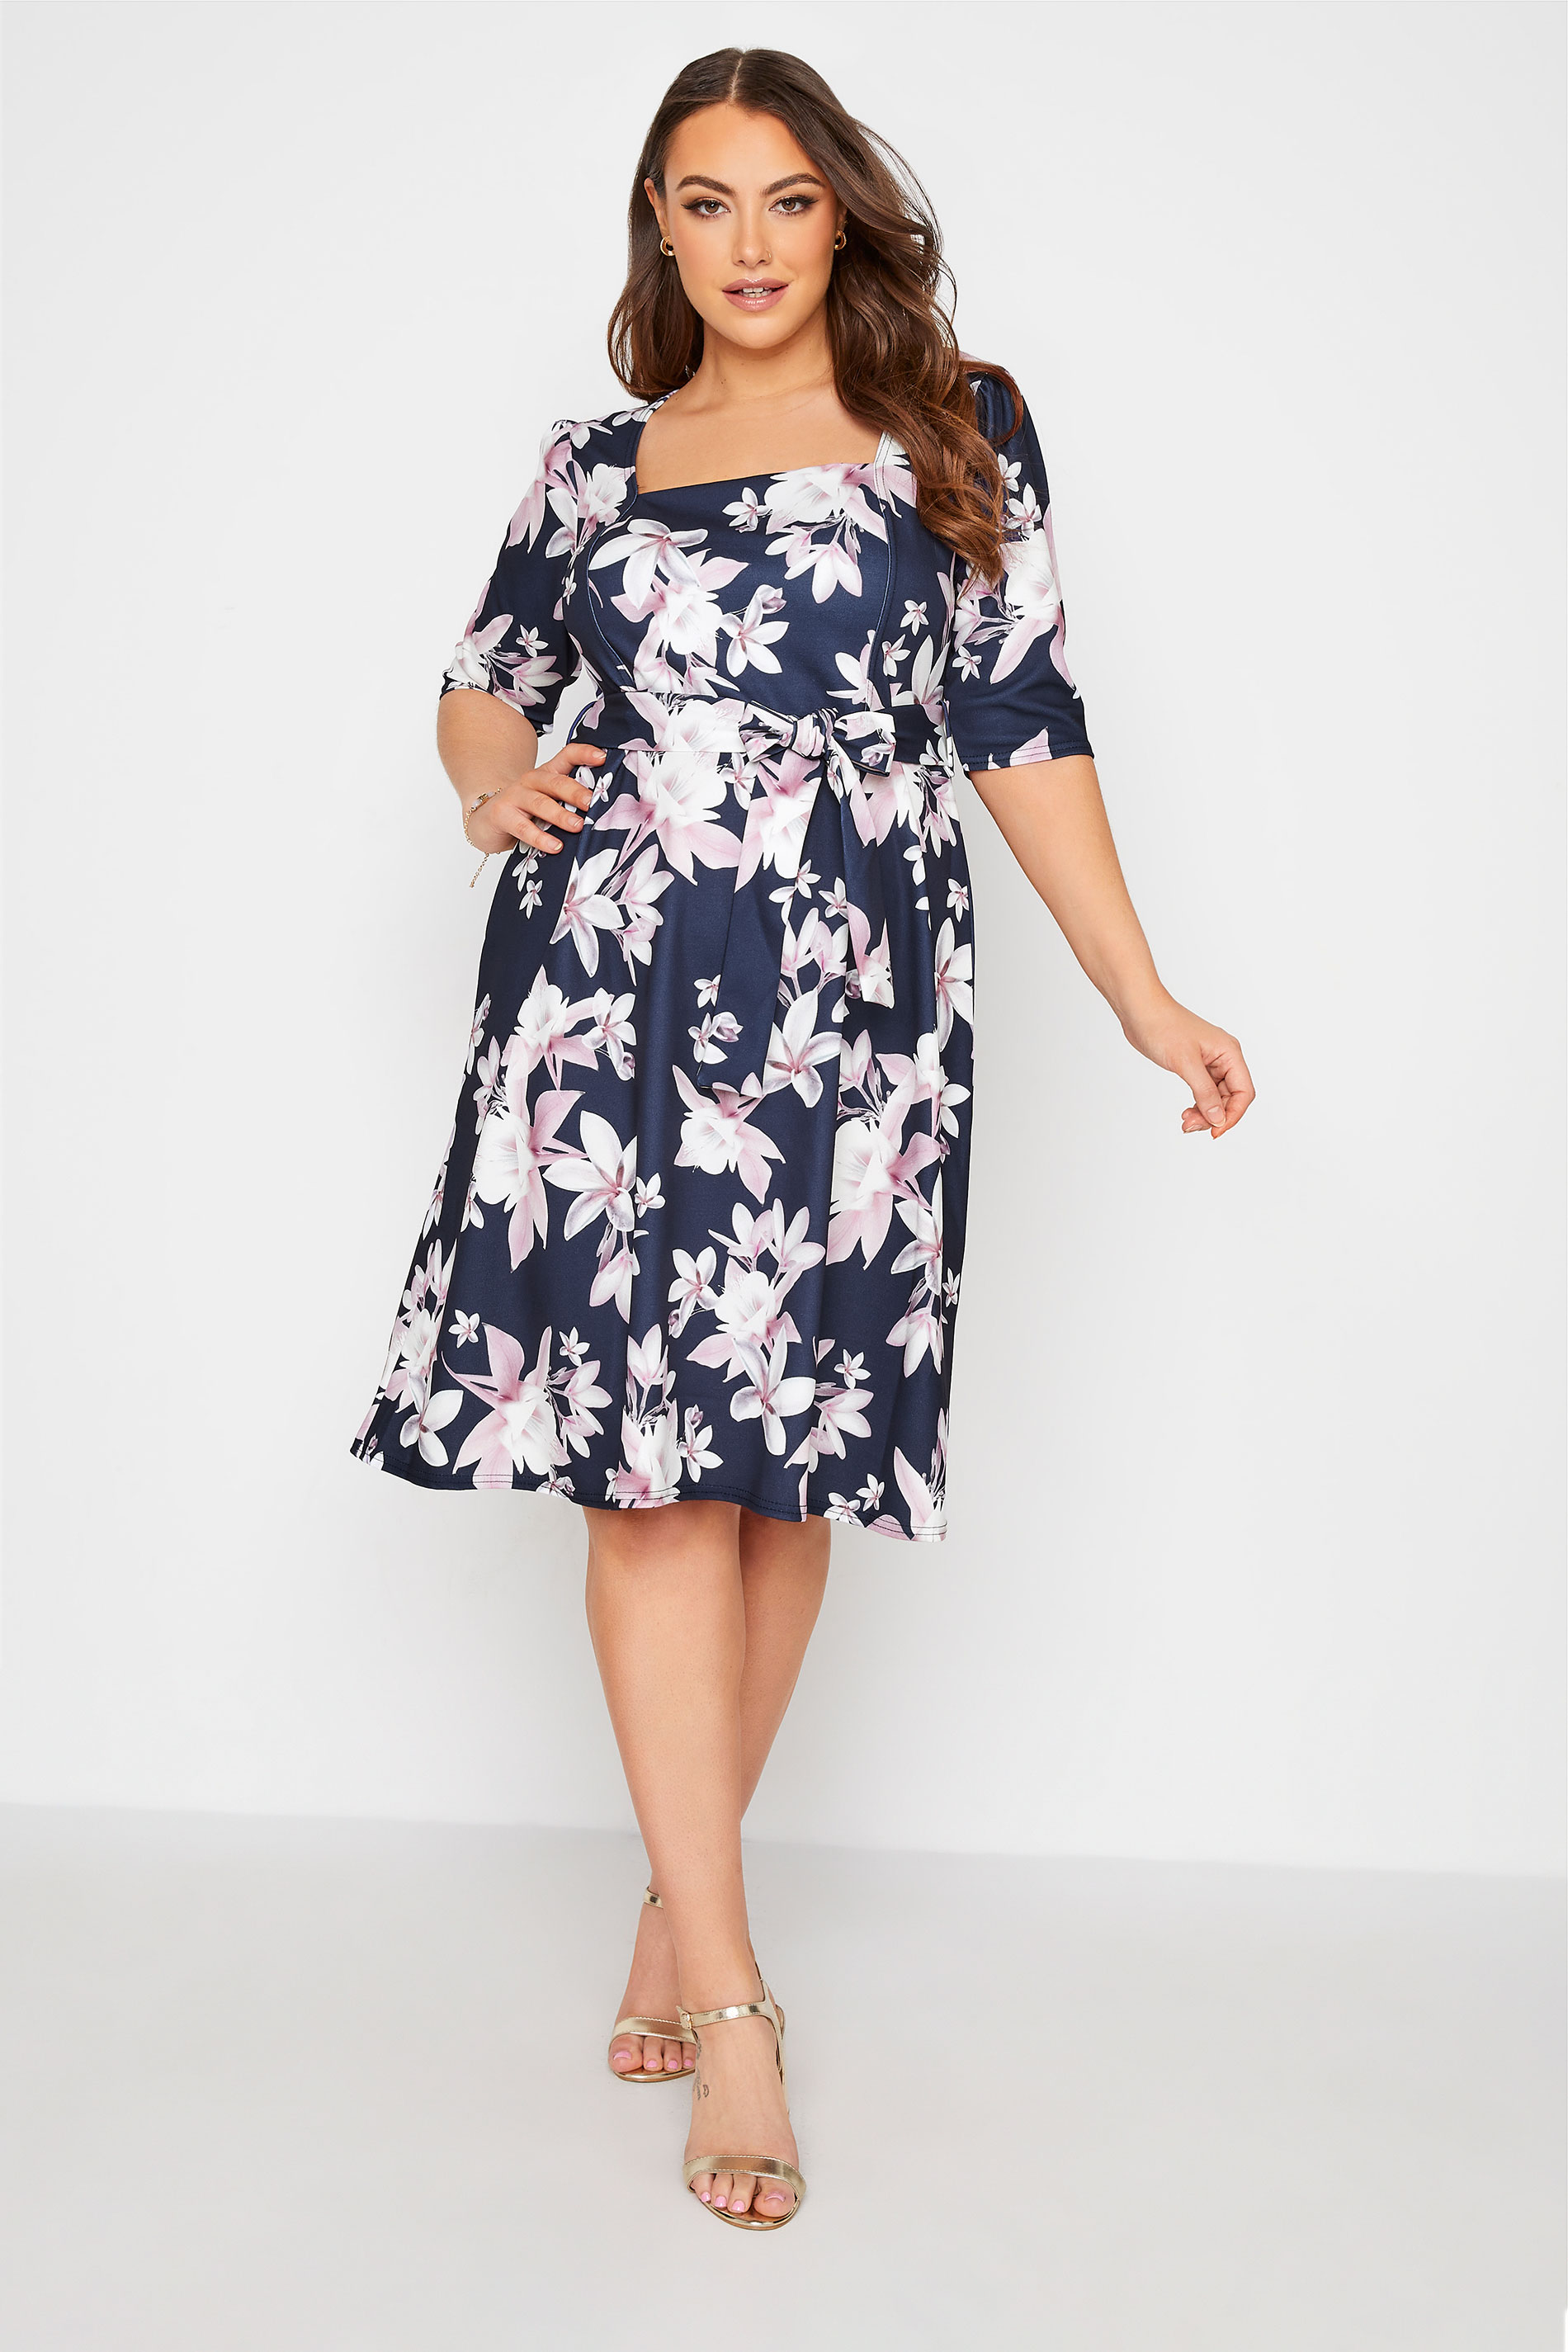 Robes Grande Taille Grande taille  Robes Imprimé Floral | YOURS LONDON - Robe Bleue Marine Floral Manches Courtes - TN37666